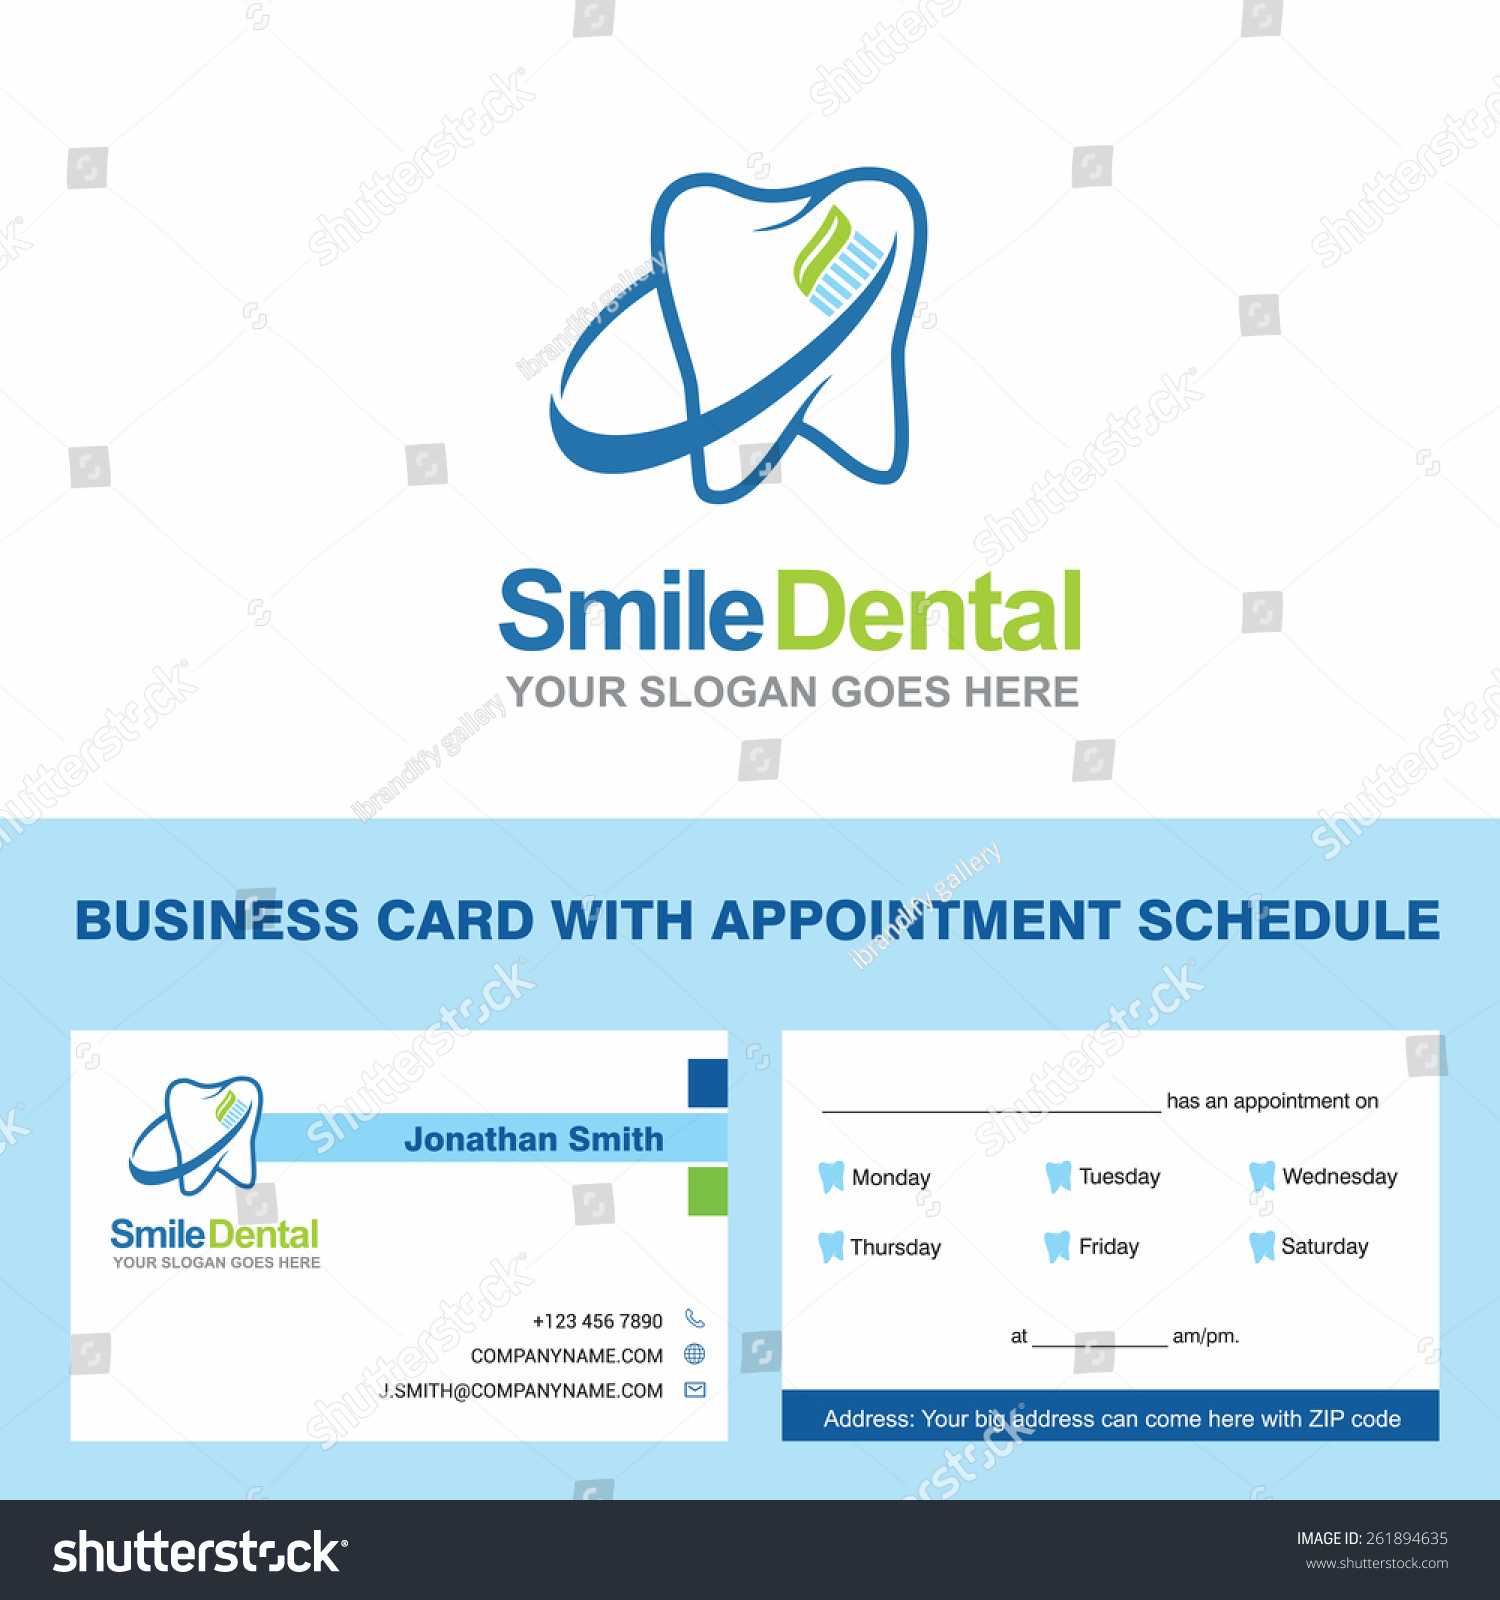 Abstract Vector Smile Dental Identity Concept Stock Vector Intended For Dentist Appointment Card Template